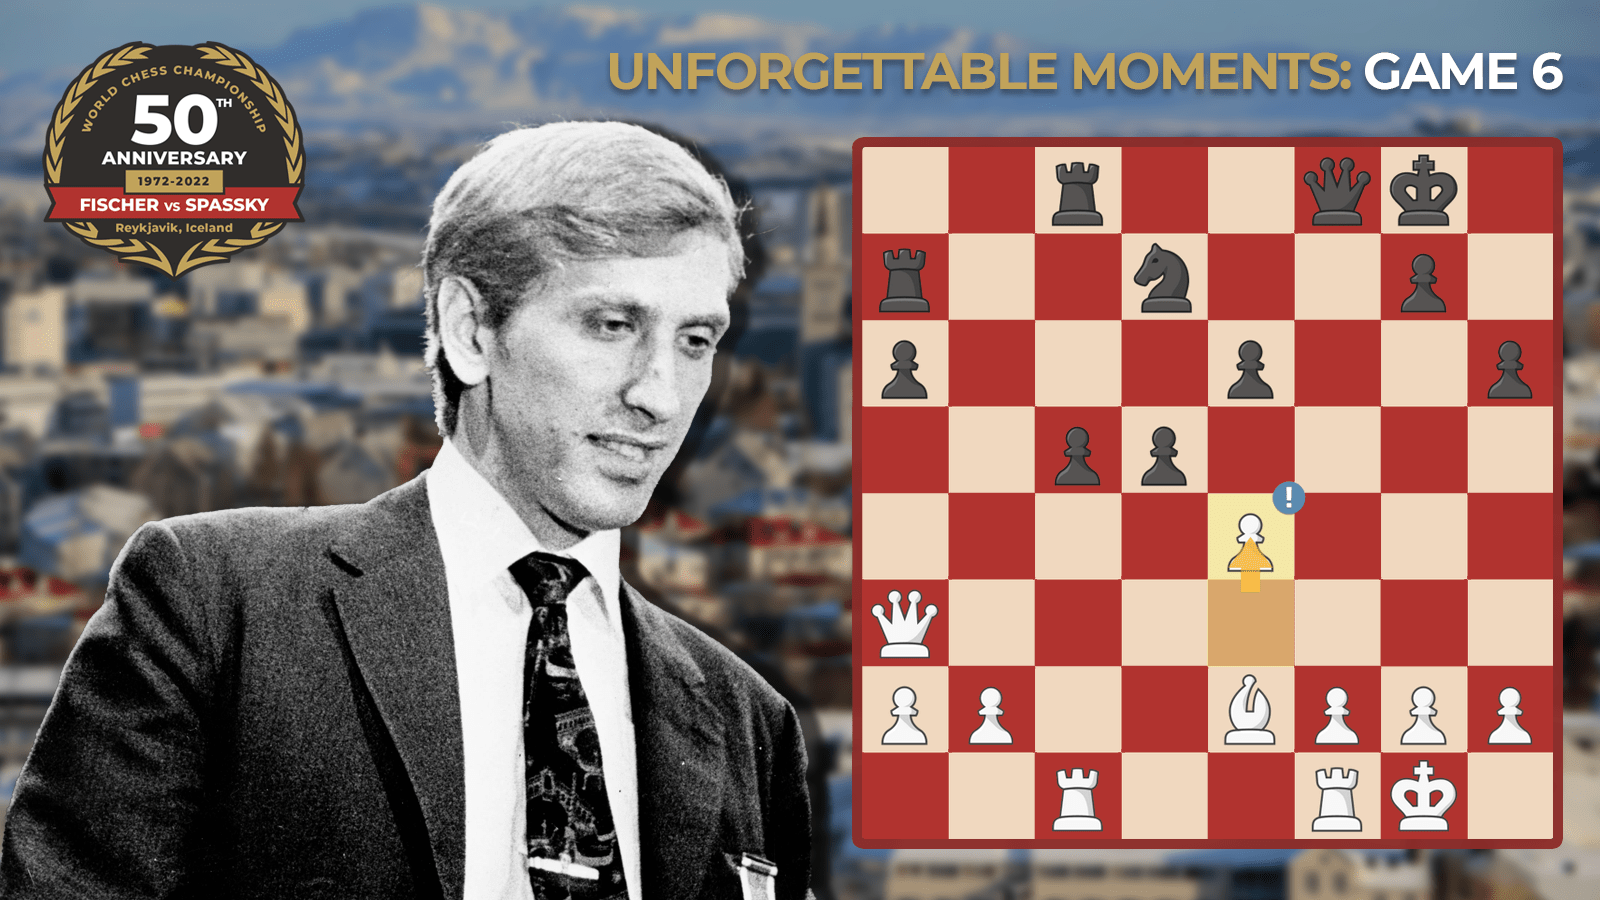 BOBBY FISCHER AN INCREDIBLE ENDGAME AGAINST SPASSKY - World Championship  1972 